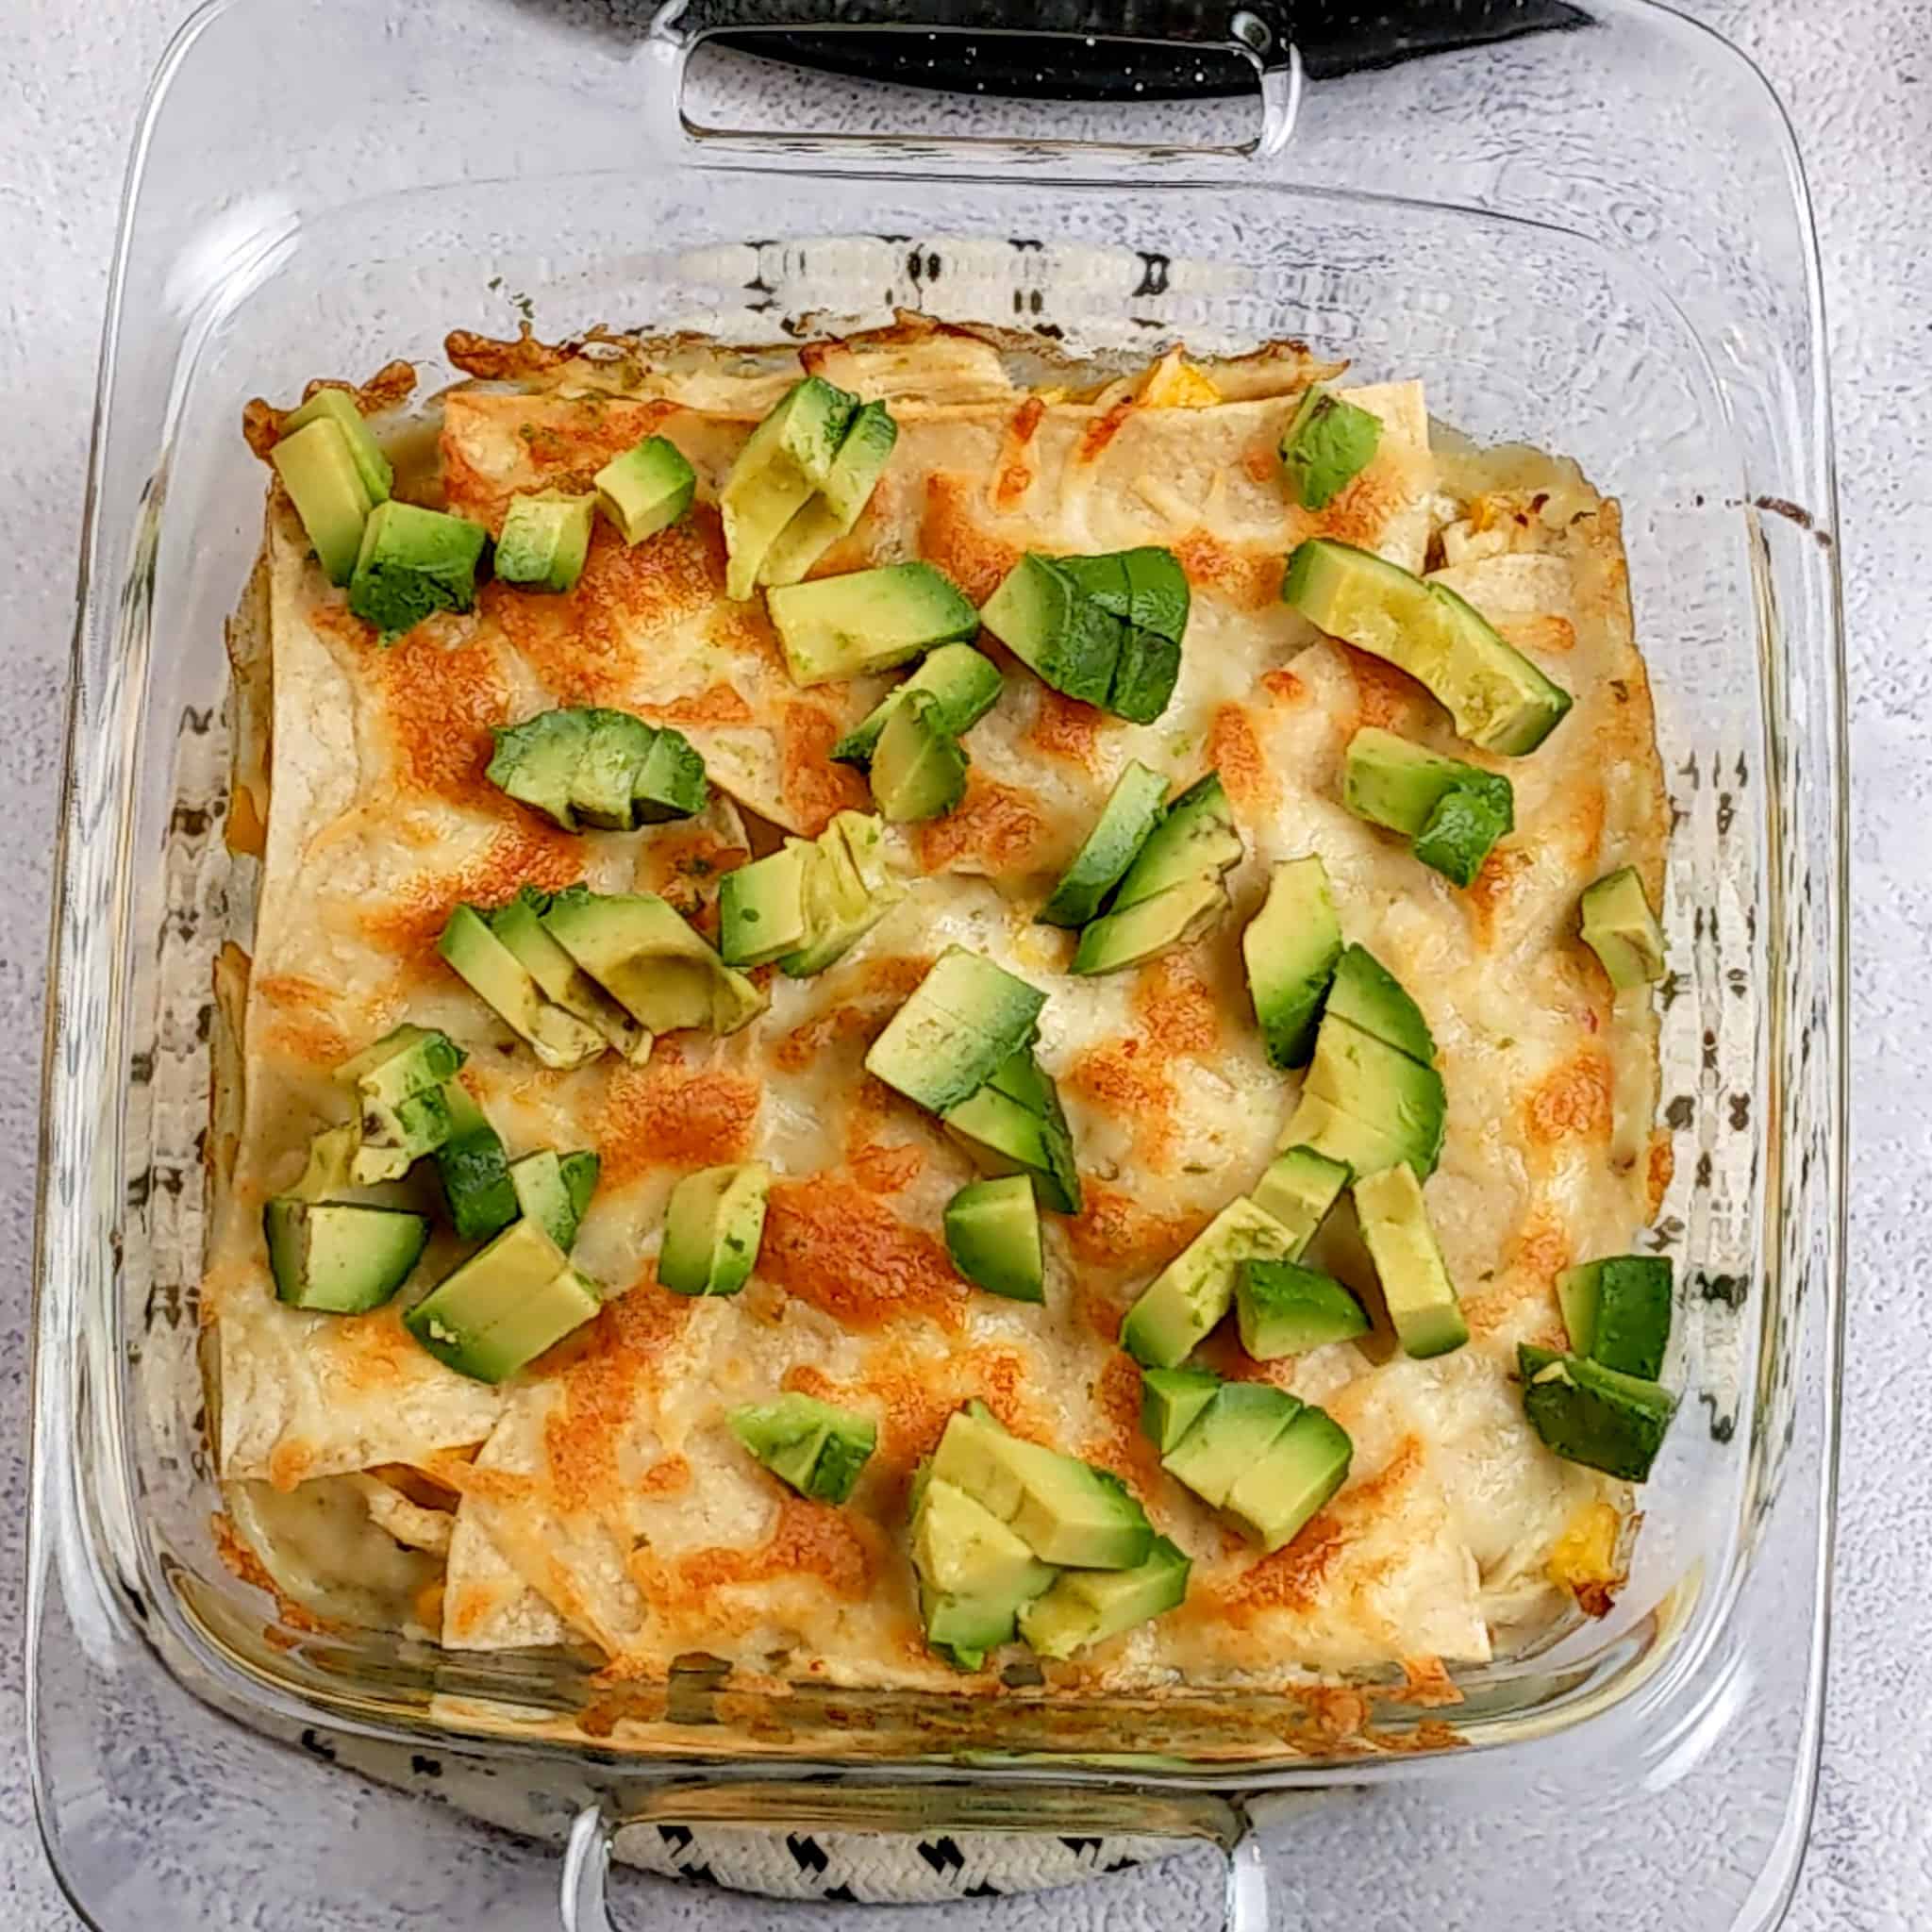 diced avocado pieces on top of the baked chicken tortilla casserole